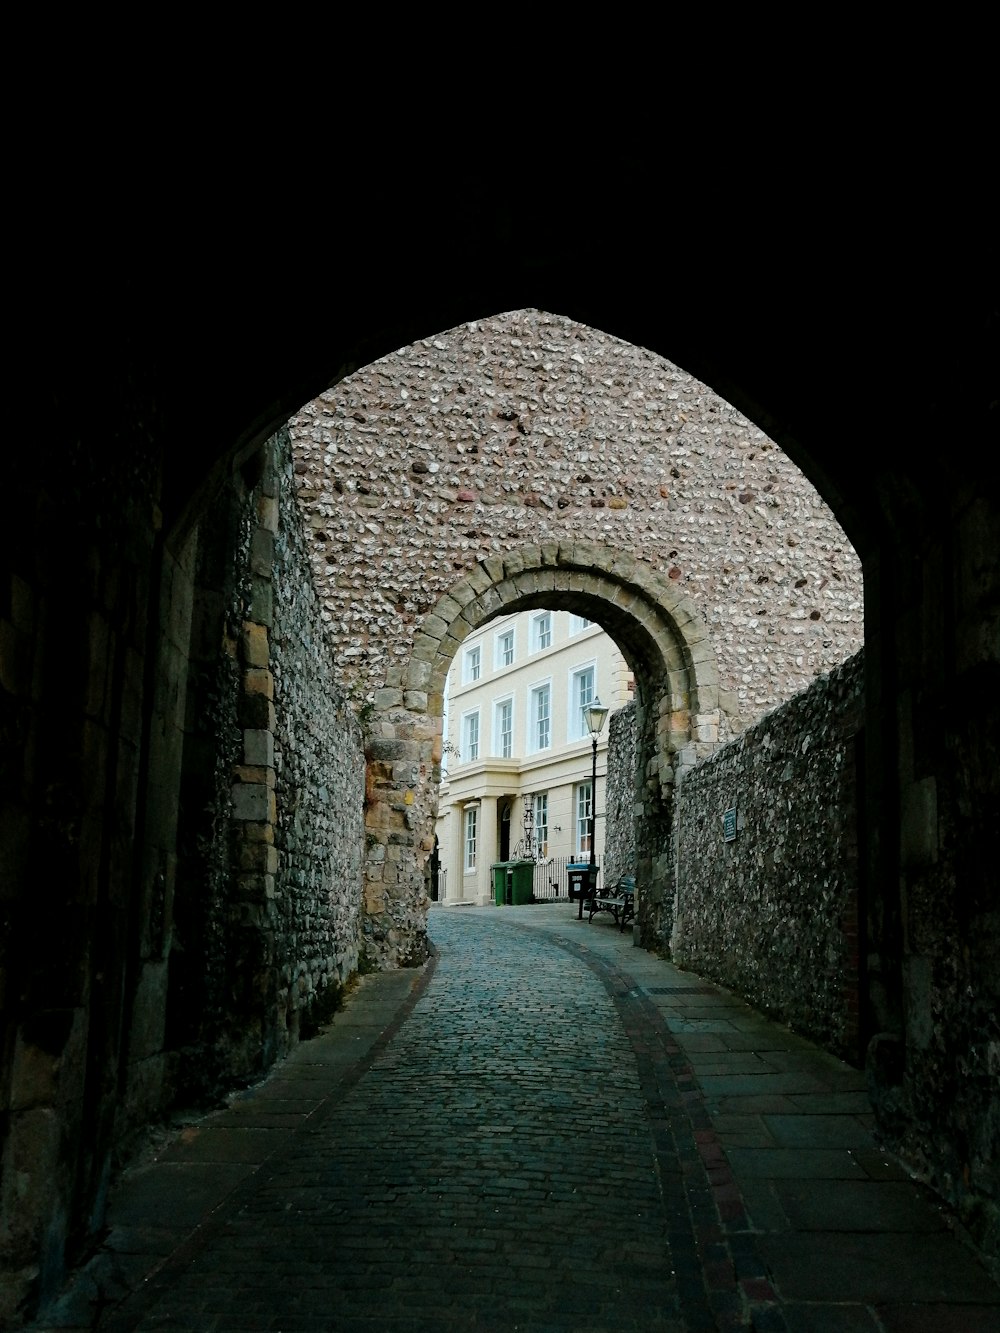 a stone archway leading to a building with a clock on it